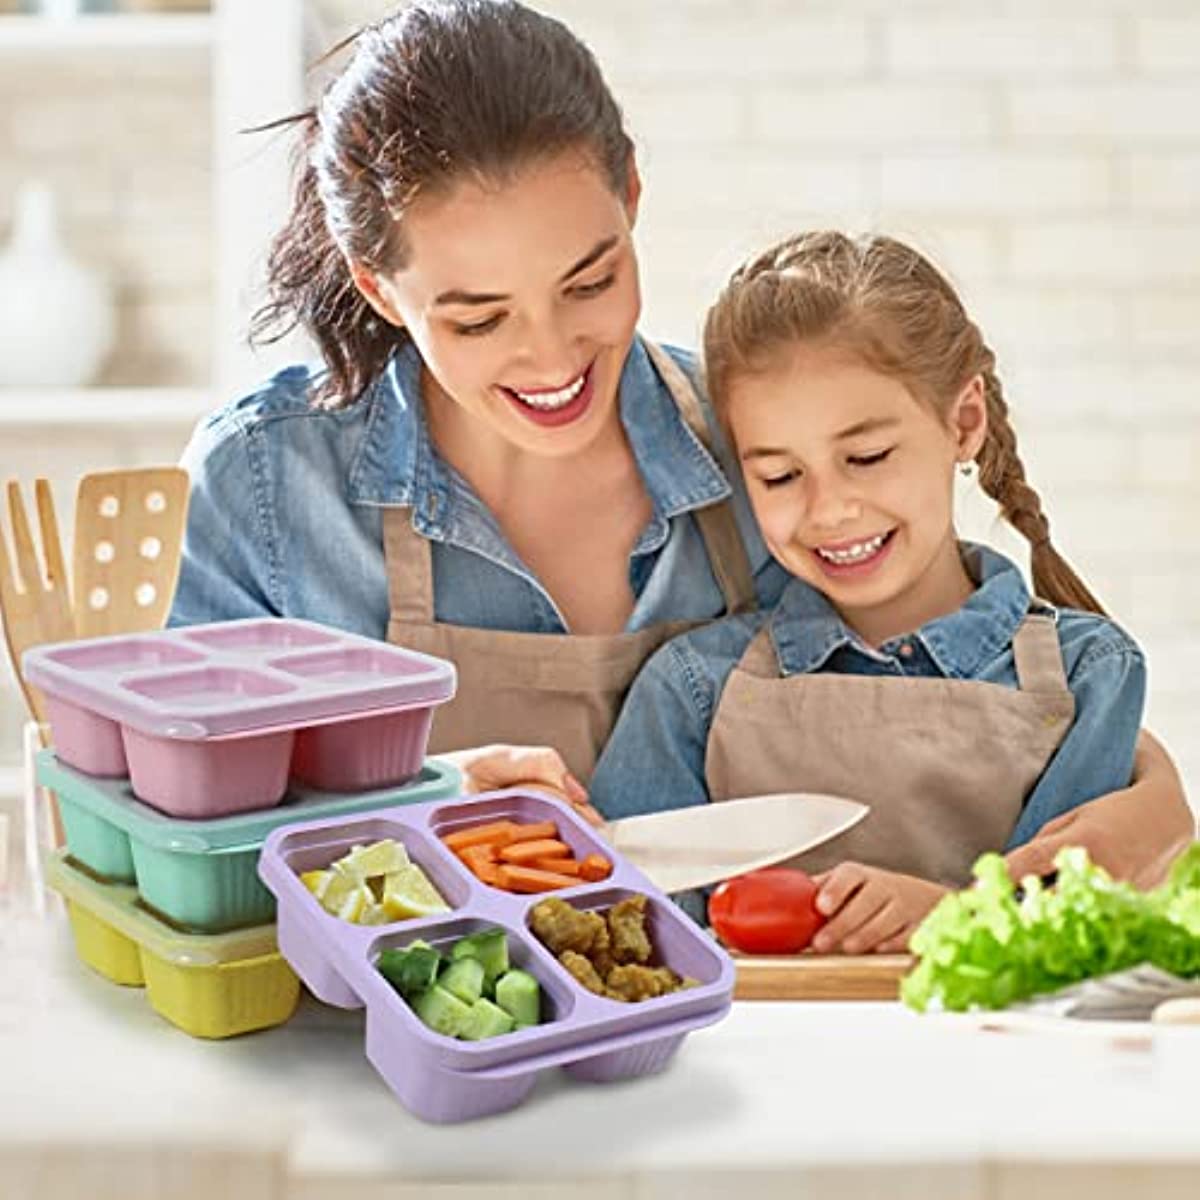 Bento Snack Boxes - Reusable 4-Compartment Food Containers For